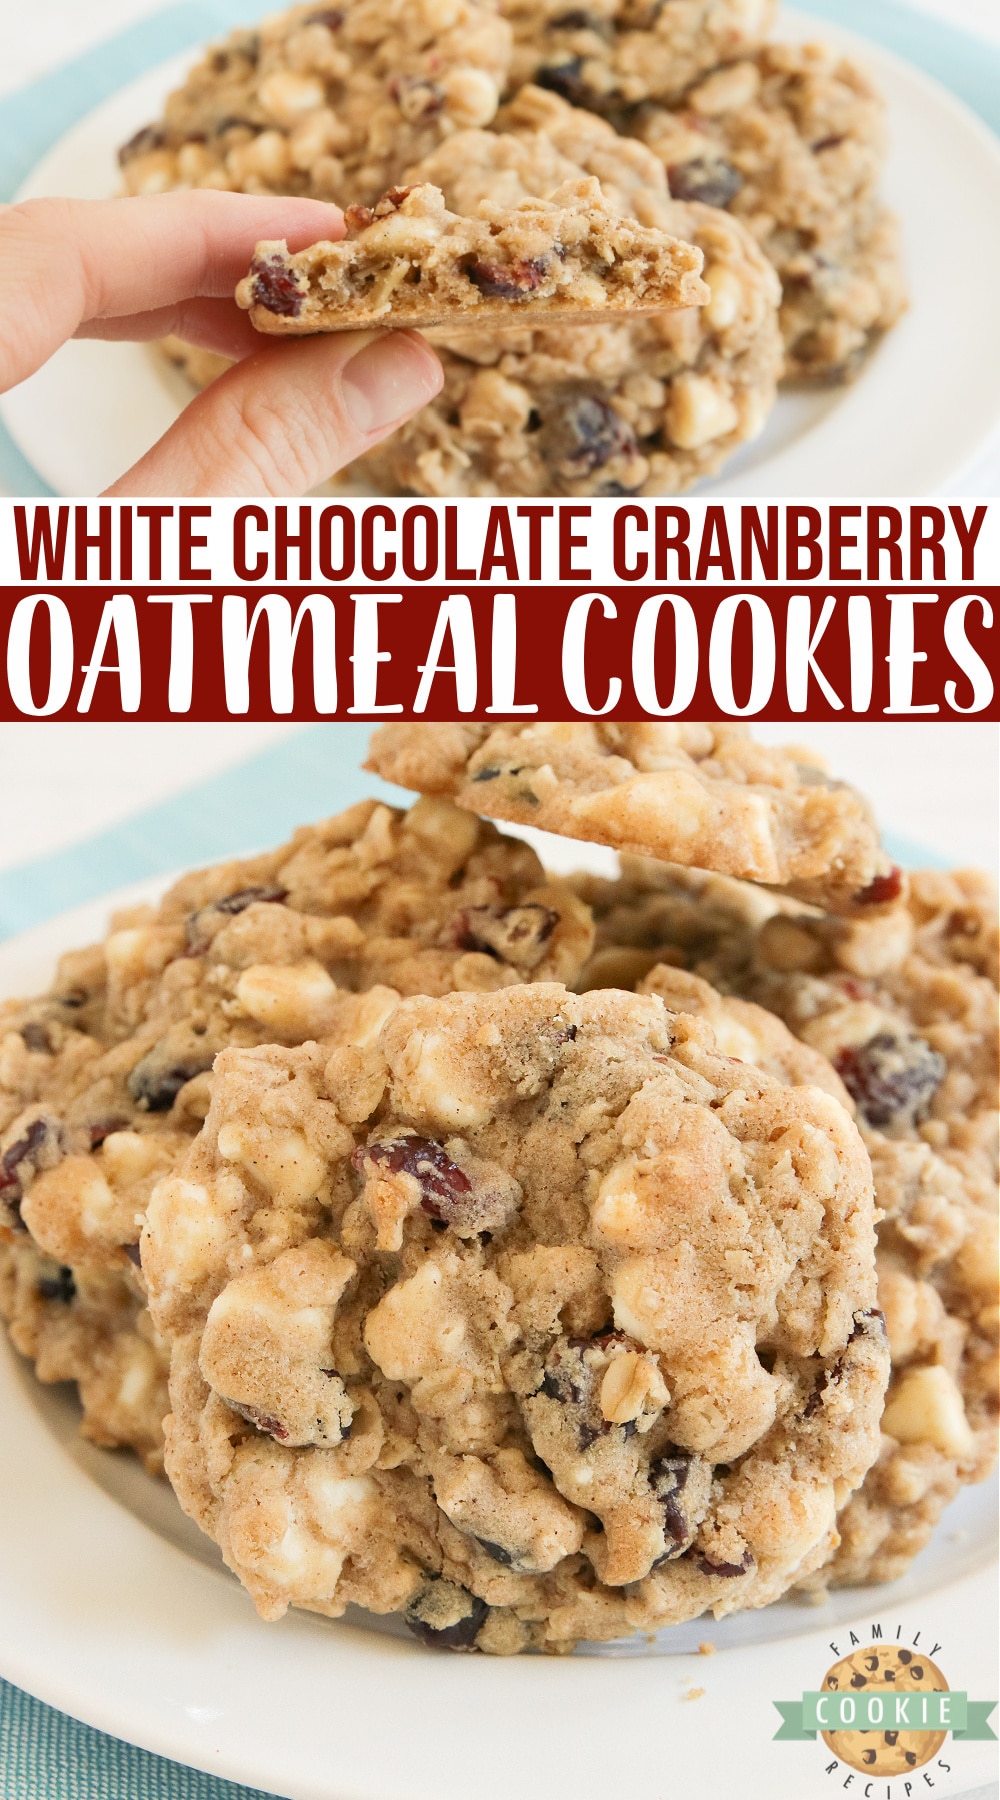 White Chocolate Cranberry Oatmeal Cookies are a classic favorite - soft, chewy oatmeal cookies packed with dried cranberries and white chocolate chips. via @buttergirls